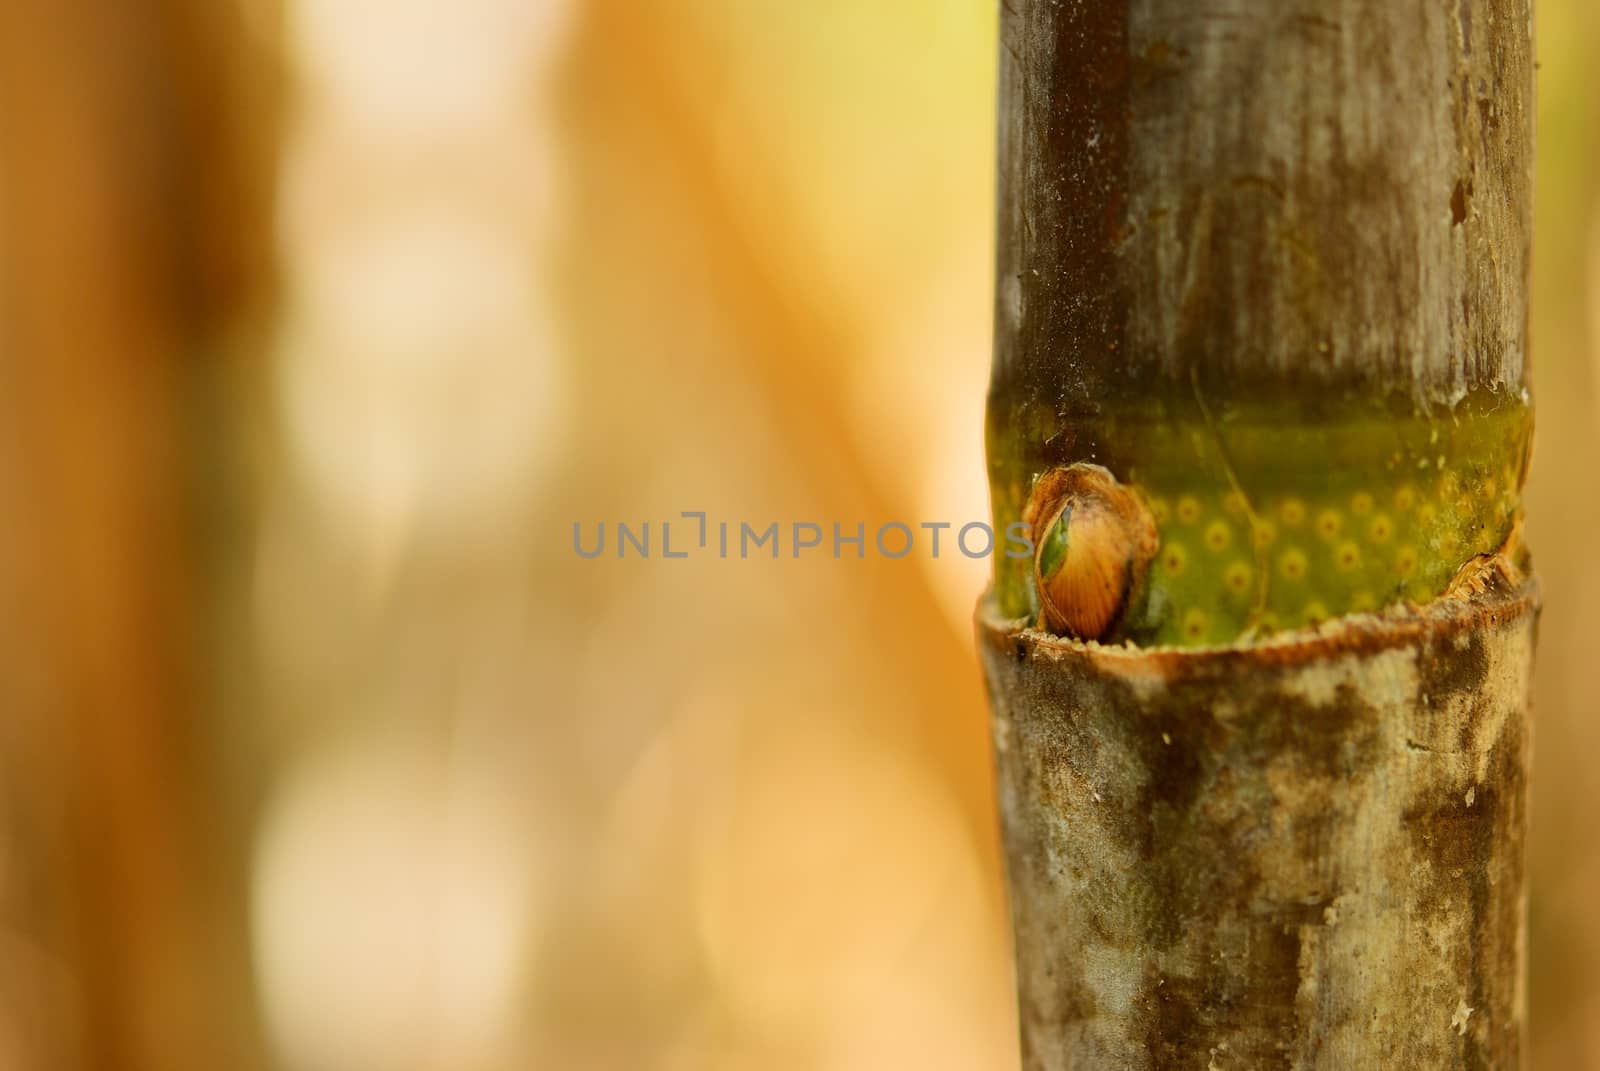 tilt shift shot on offshoot of cane with dry background